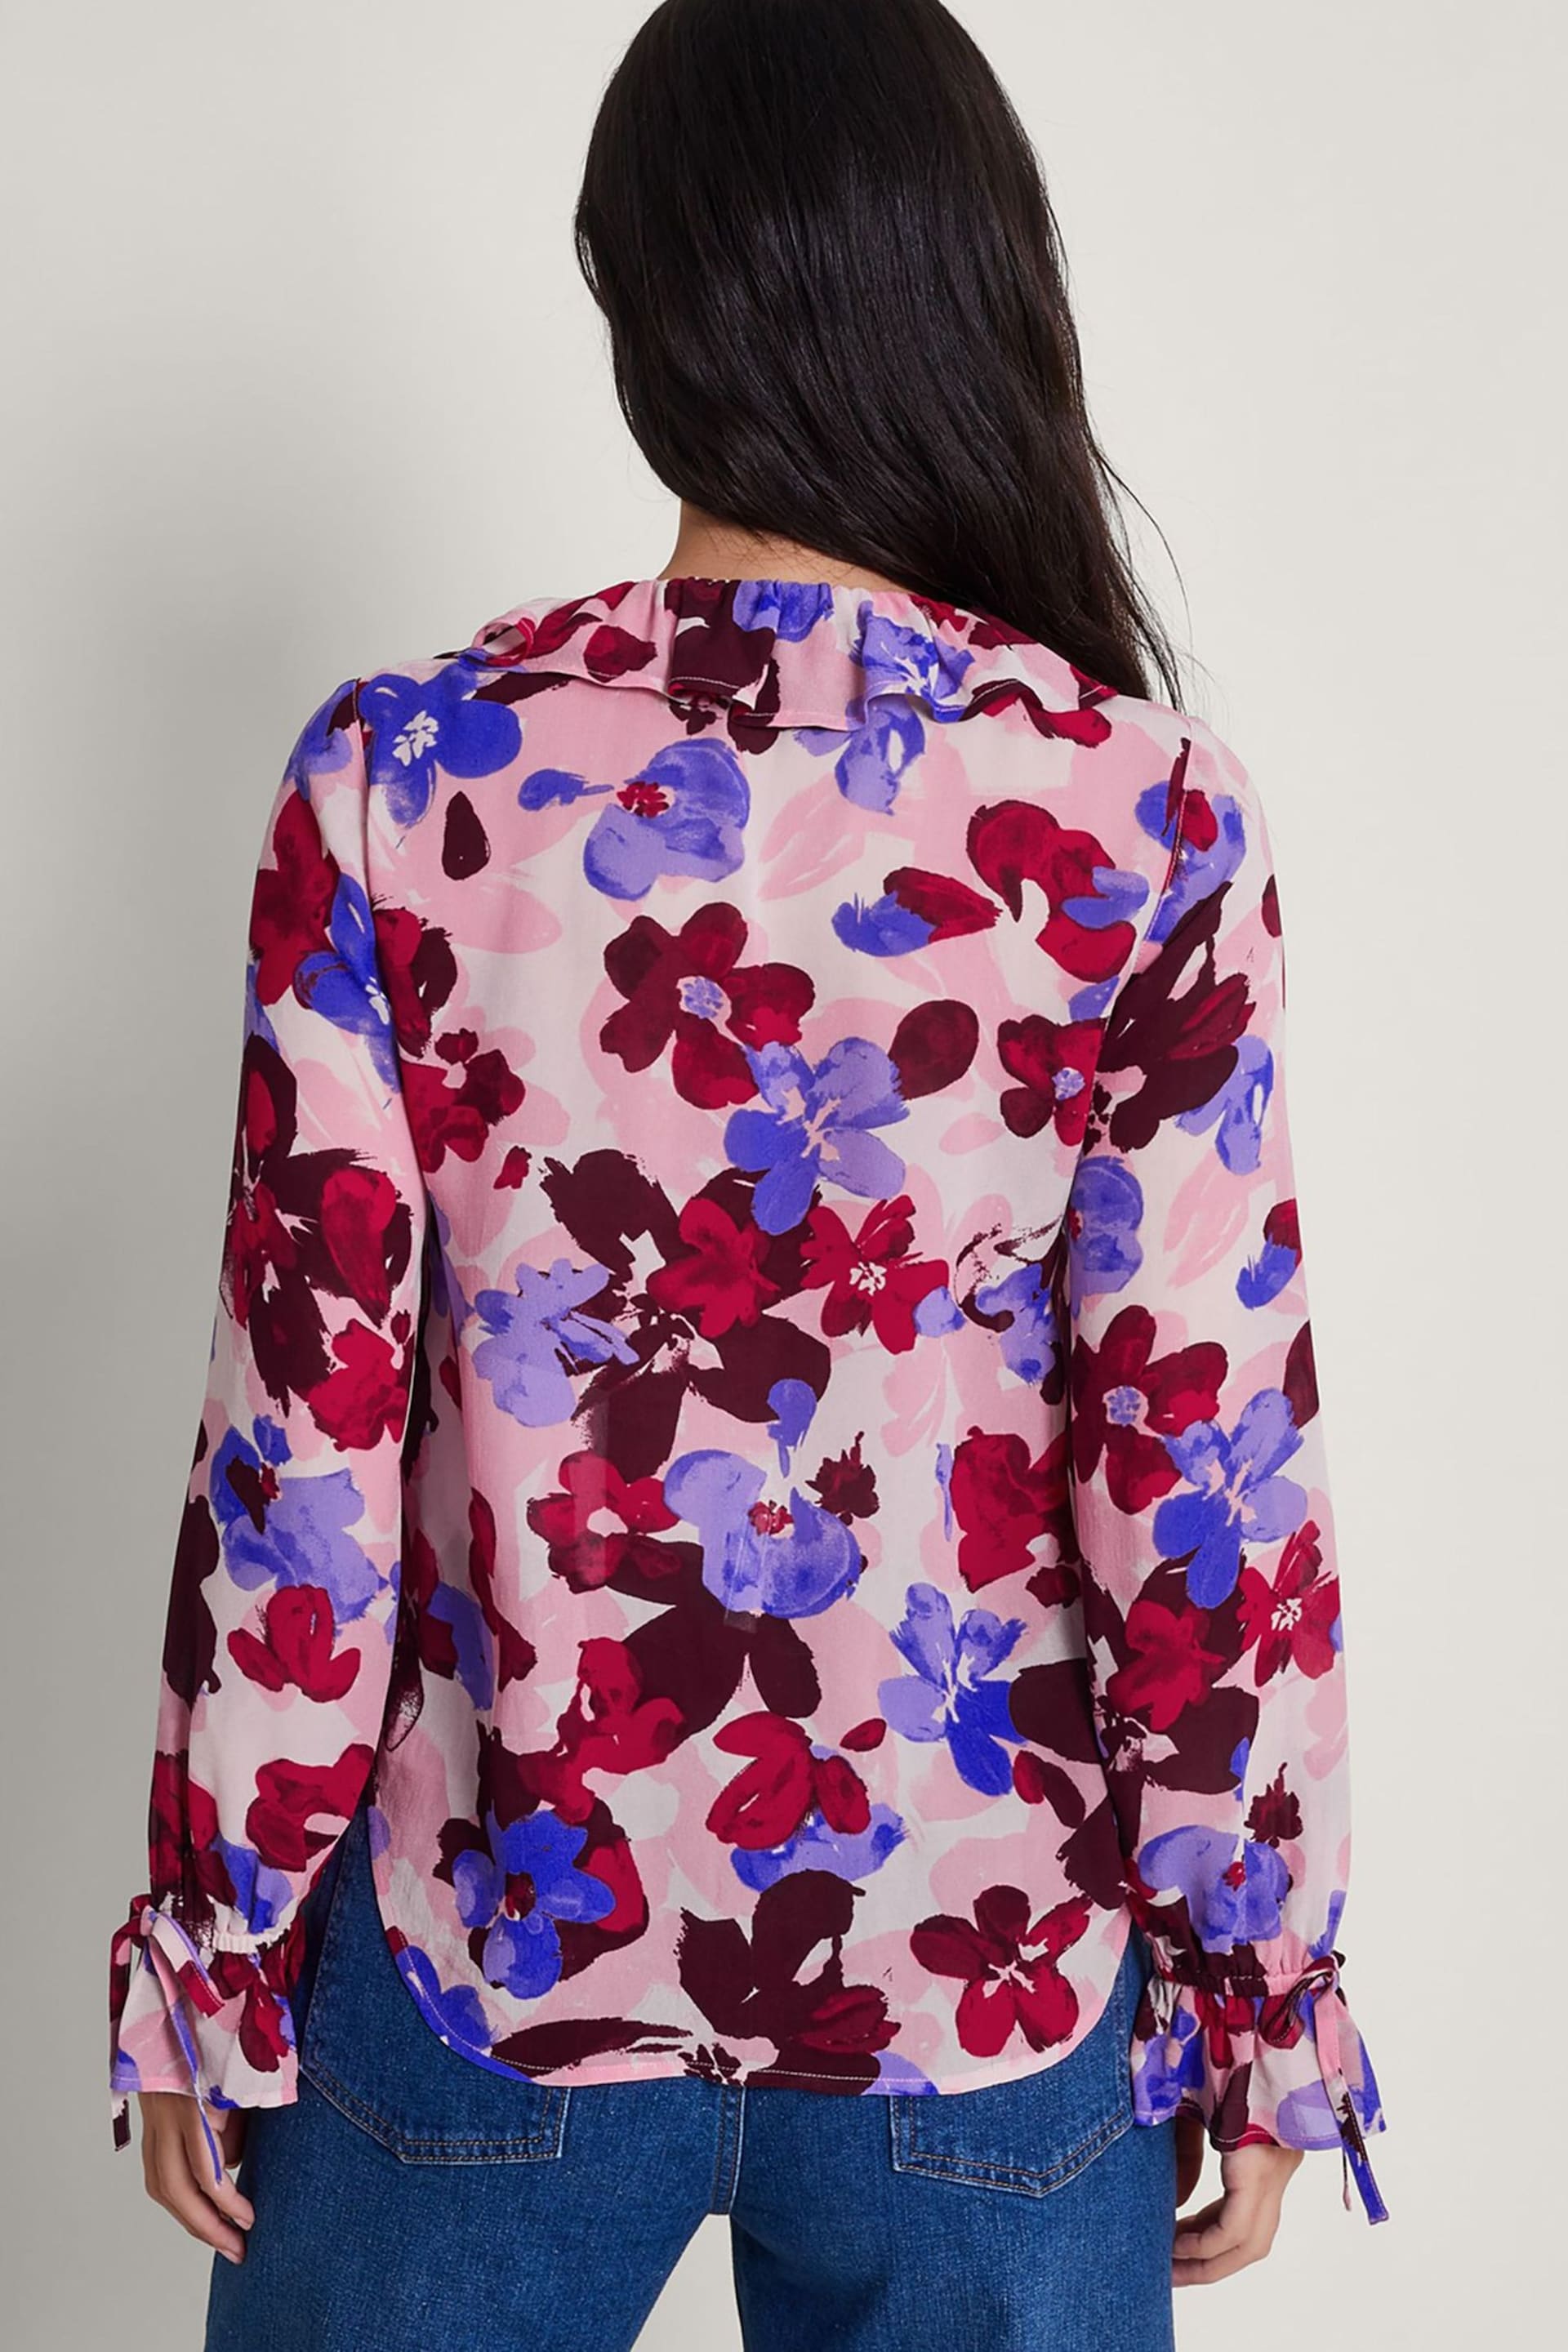 Monsoon Vittoria Floral Print Blouse - Image 2 of 5